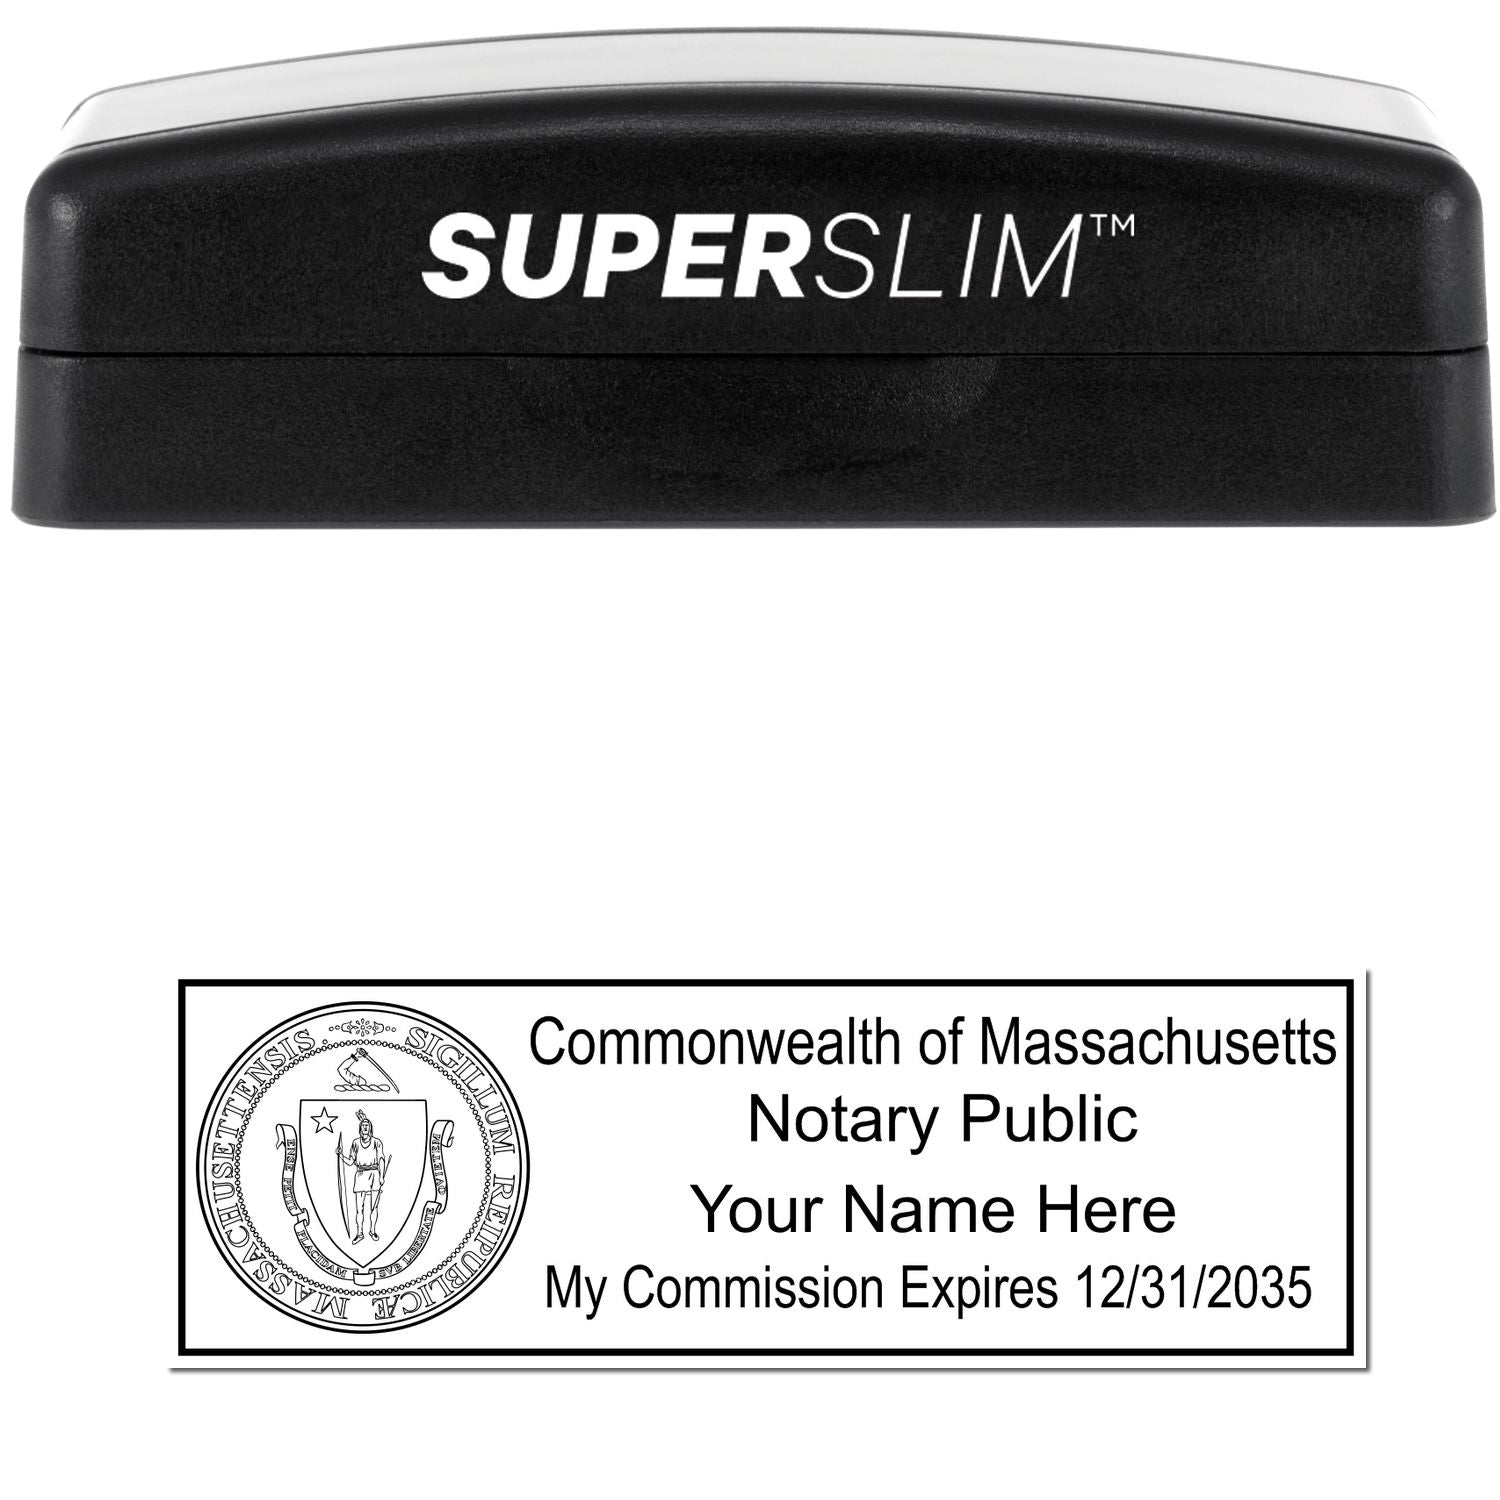 The main image for the Super Slim Massachusetts Notary Public Stamp depicting a sample of the imprint and electronic files